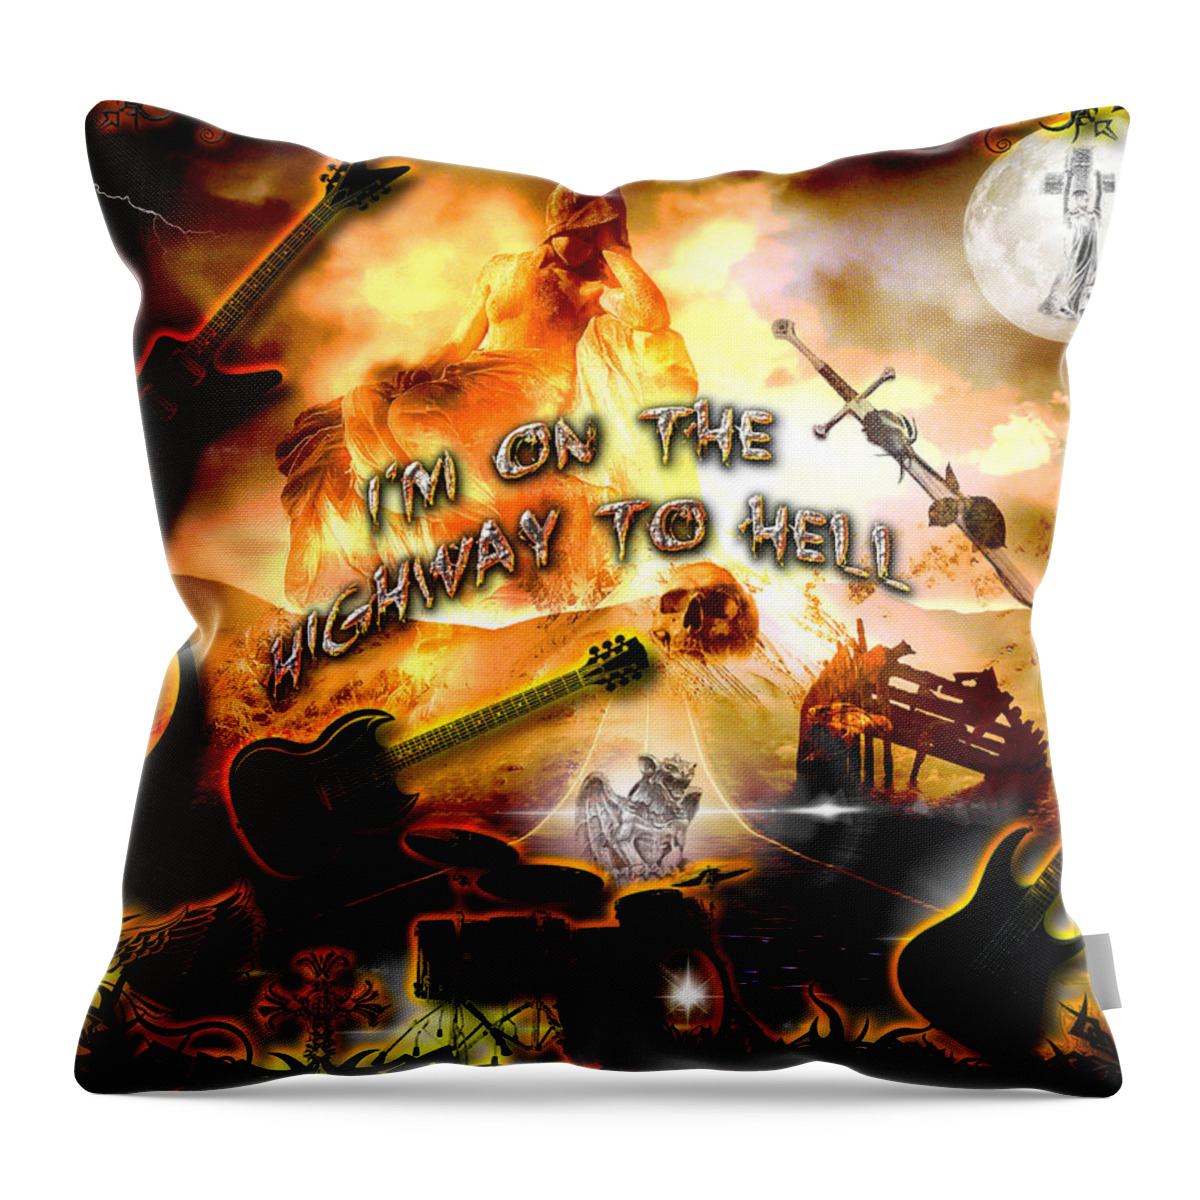 Classic Rock Throw Pillow featuring the digital art The Highway To Hell by Michael Damiani